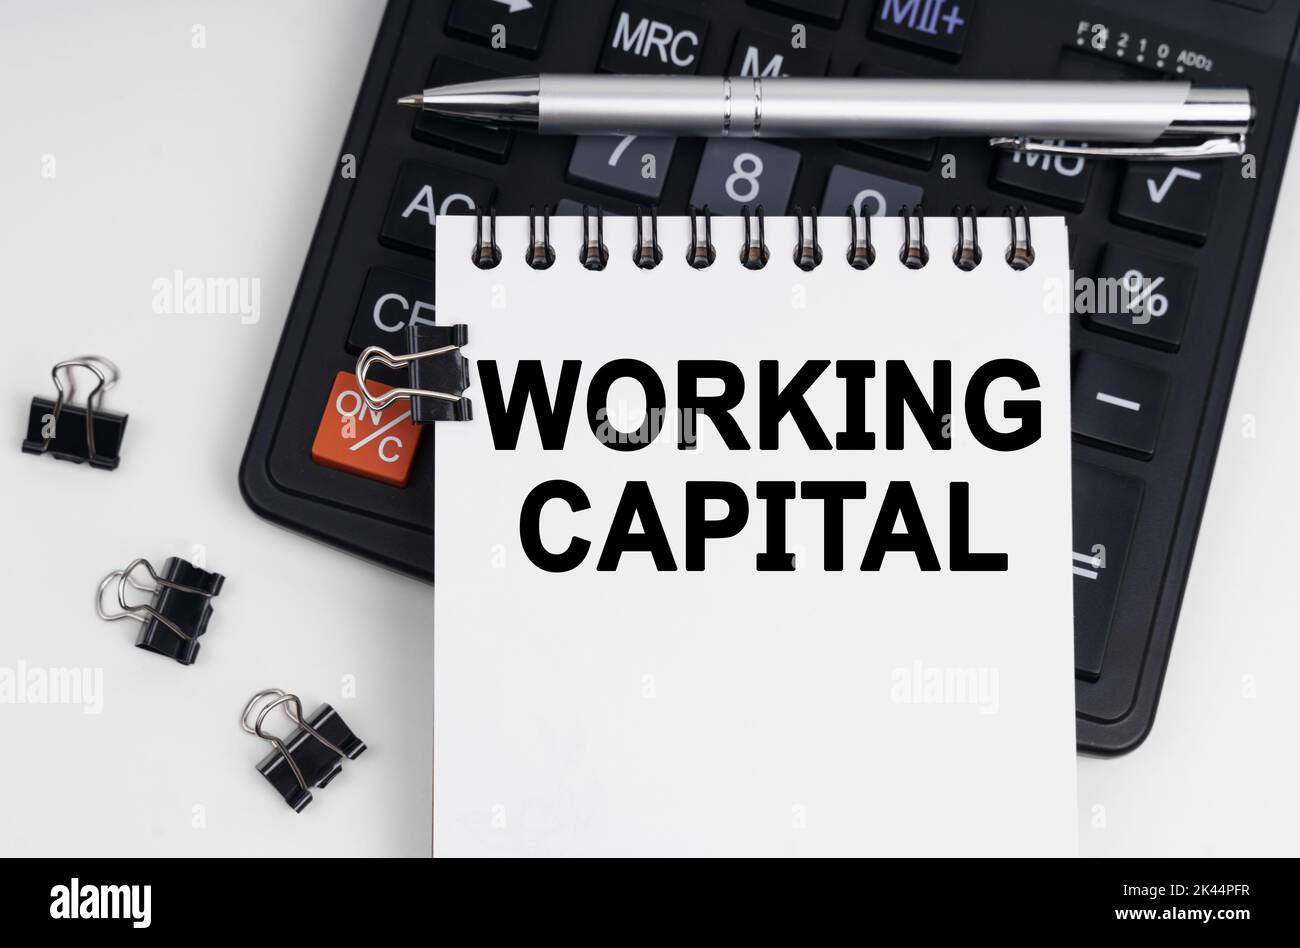 Business and economics concept. On the table is a calculator, a pen and a notebook with the inscription - WORKING CAPITAL Stock Photo